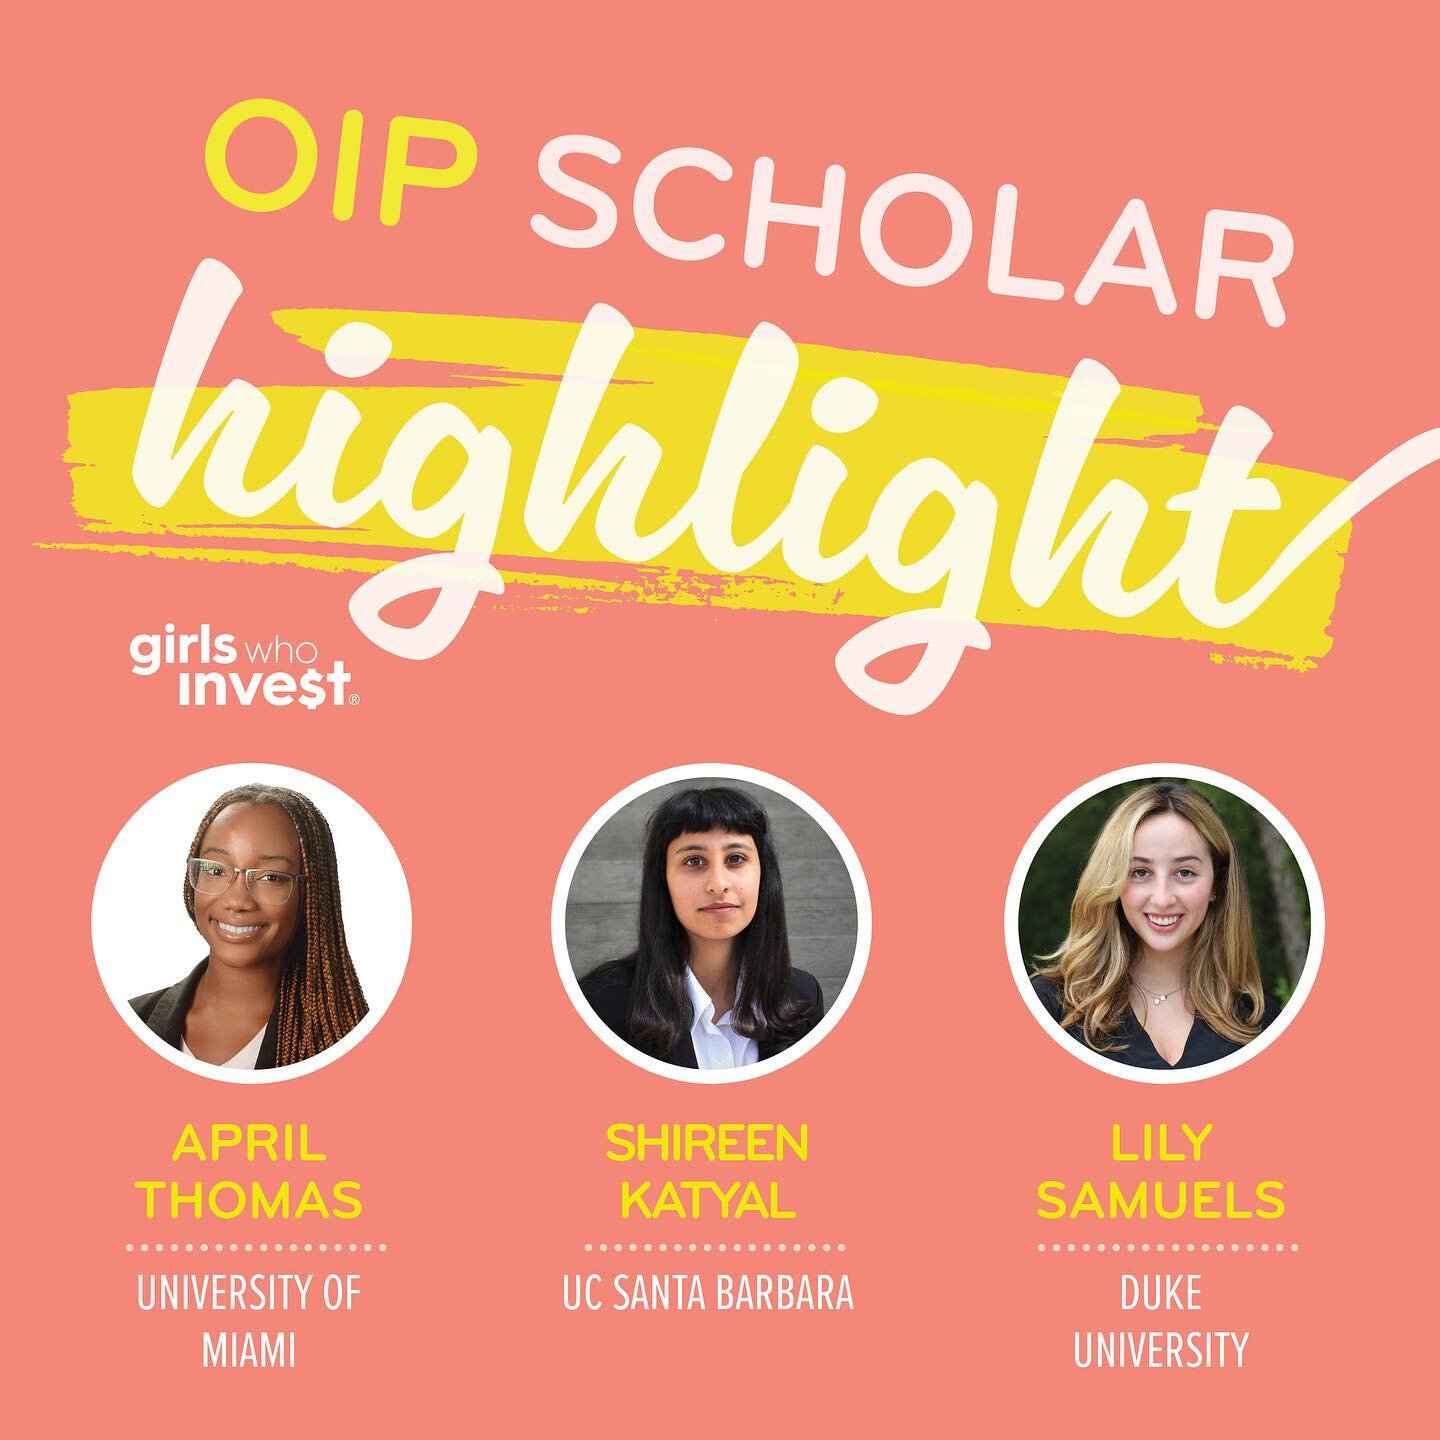 As we gear up to meet and greet members of the 2023 OIP cohort in person next week, please join us in welcoming April, Shireen and Lily to the GWI community!